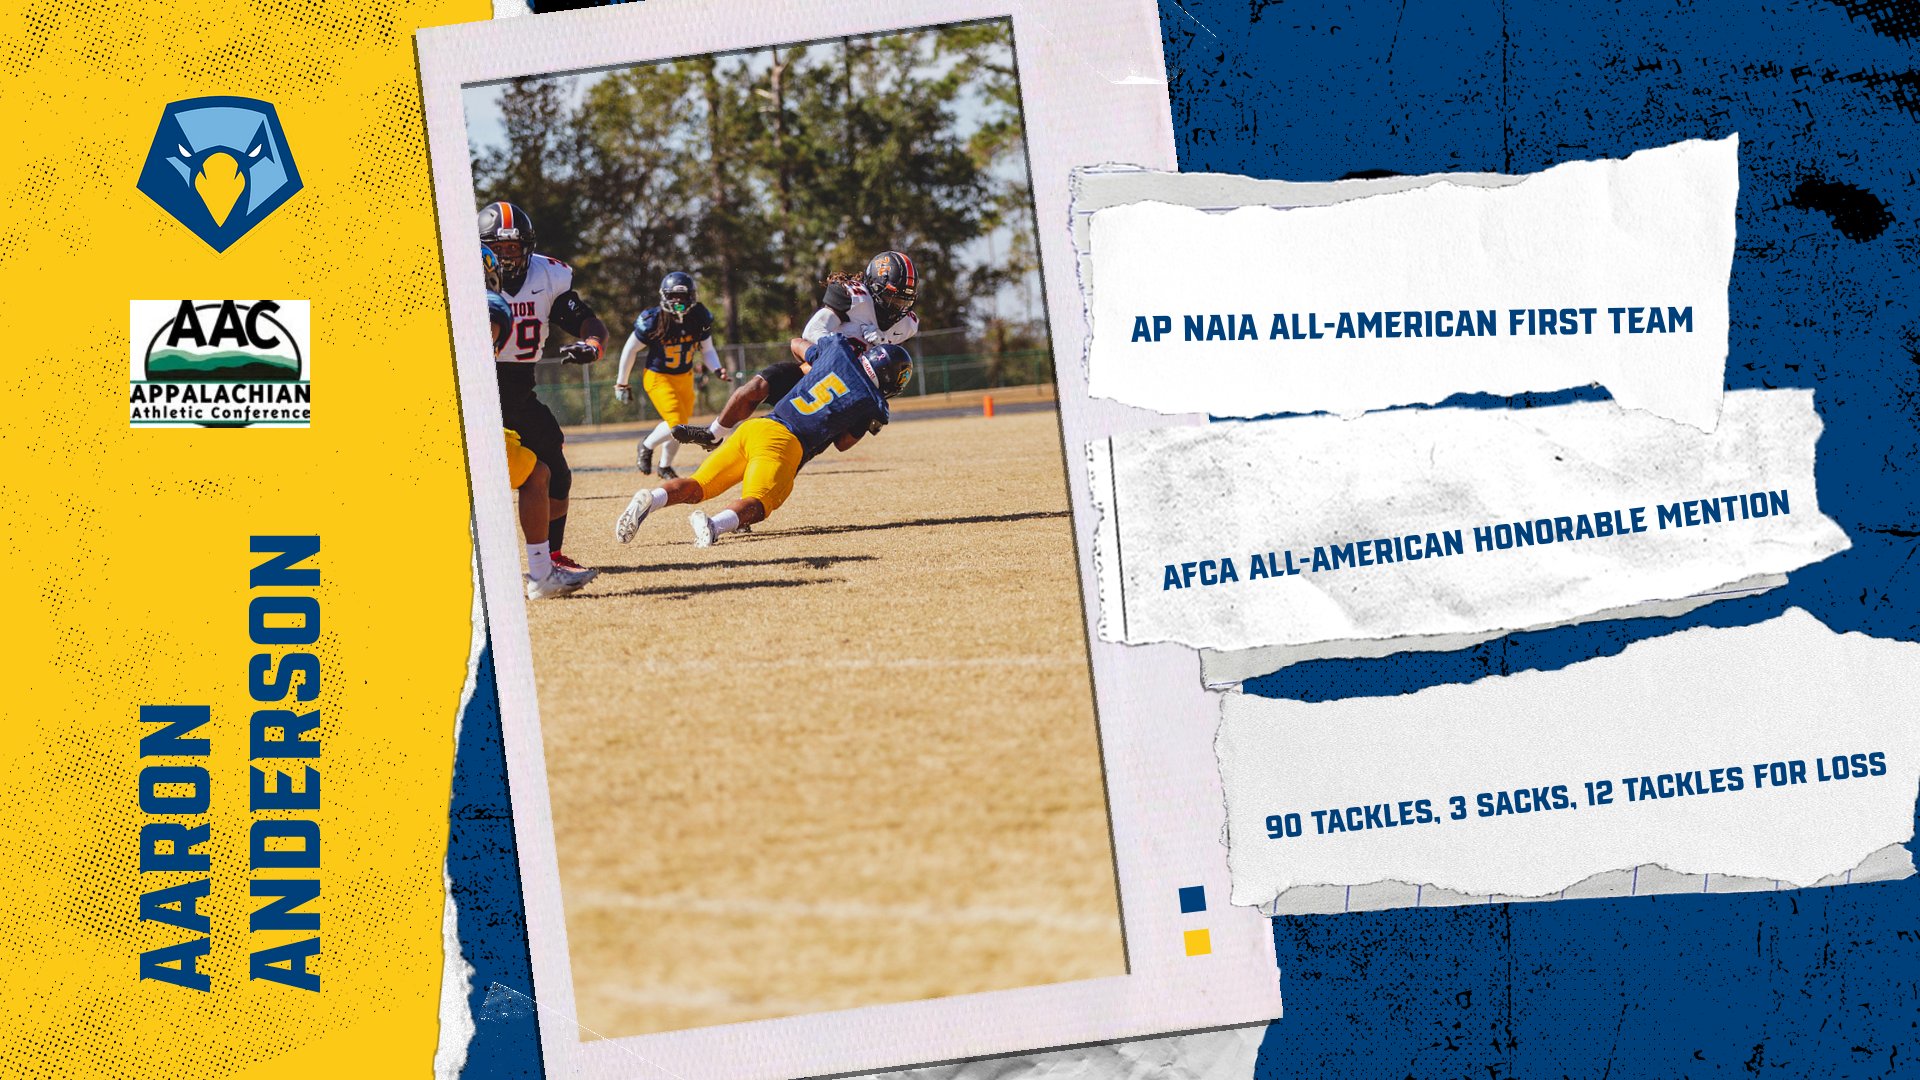 Aaron Anderson&rsquo;s historic season earns him All-American honors